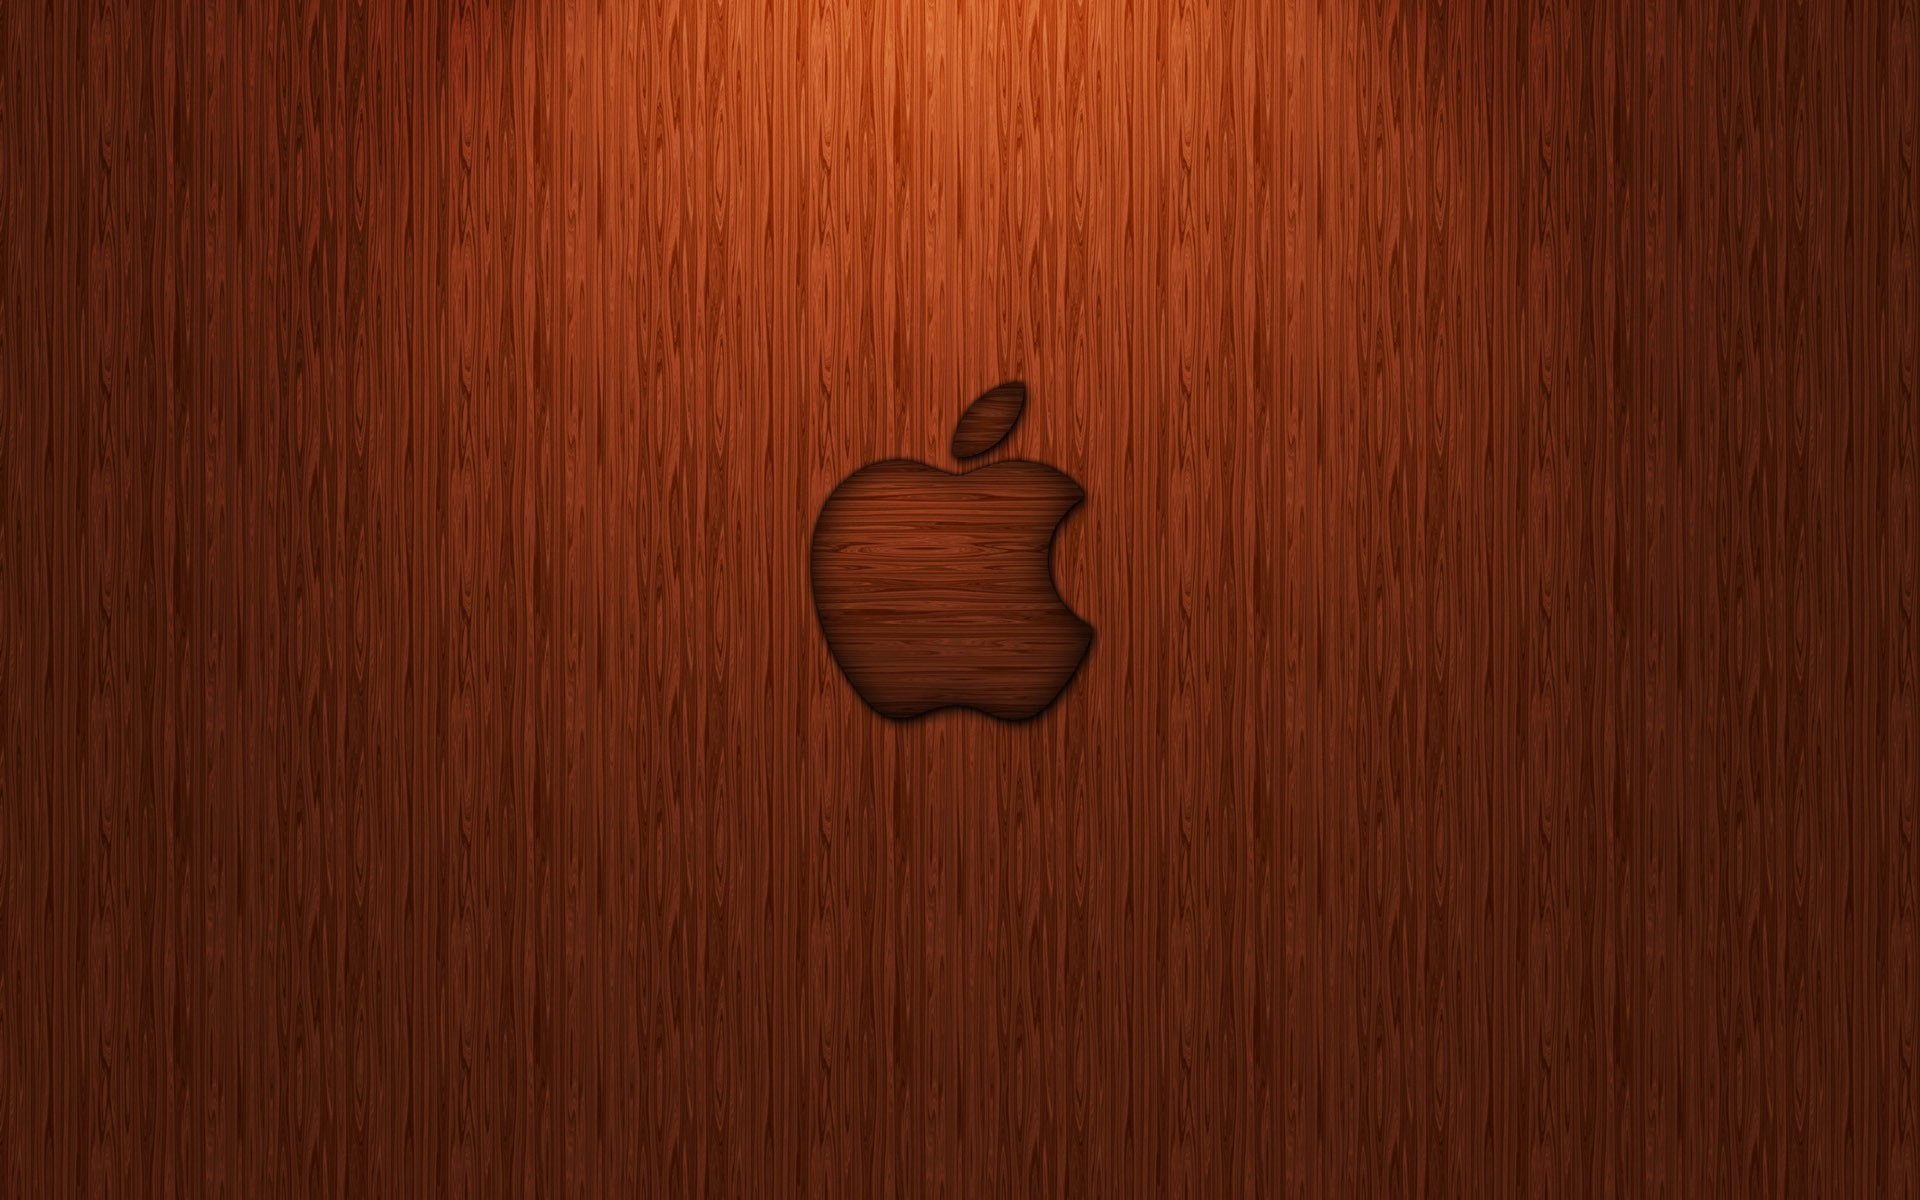 Logos Backgrounds In High Quality: Wooden Apple Logo by Mindy ...